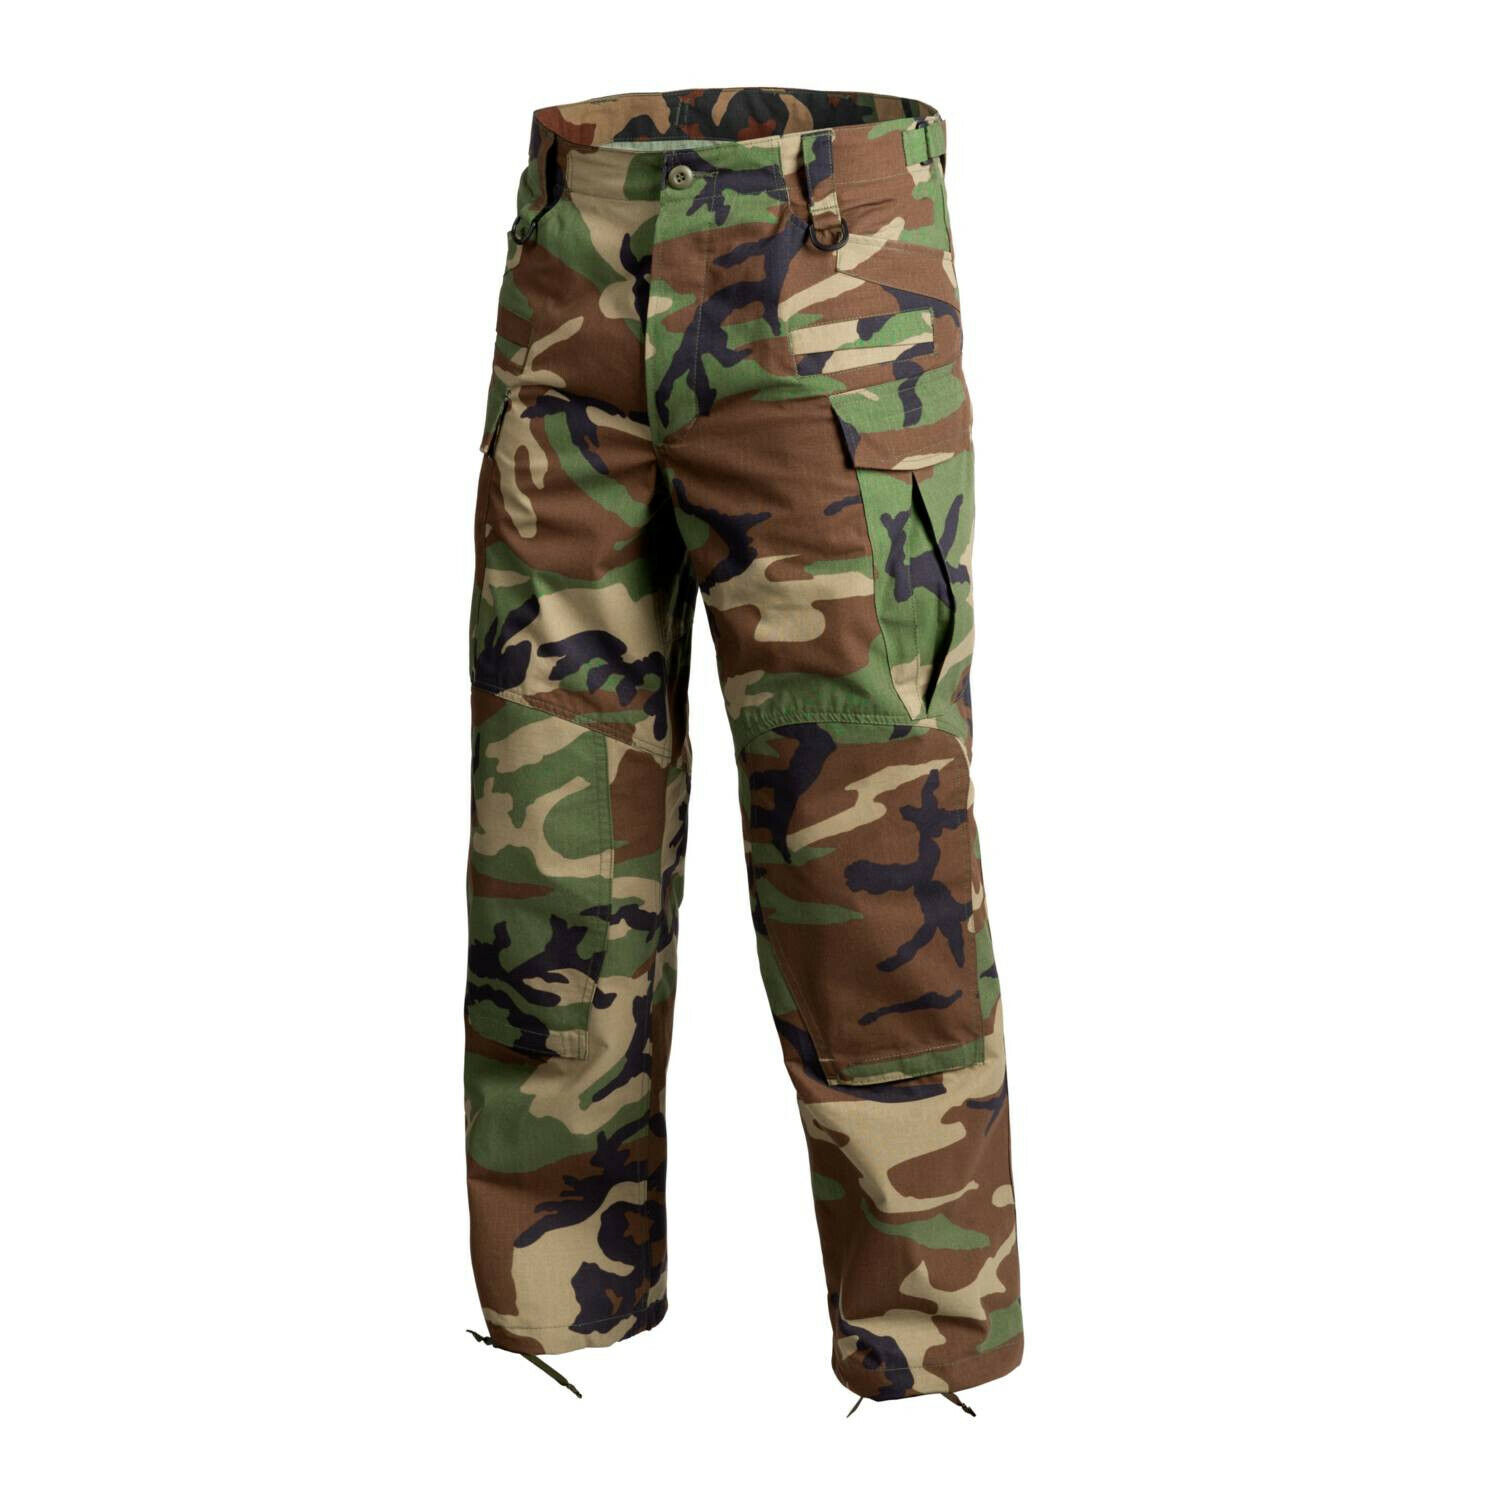 Helikon Tex Sfu Next Special Forces Pants Army Pants Woodland Camouflage Mr